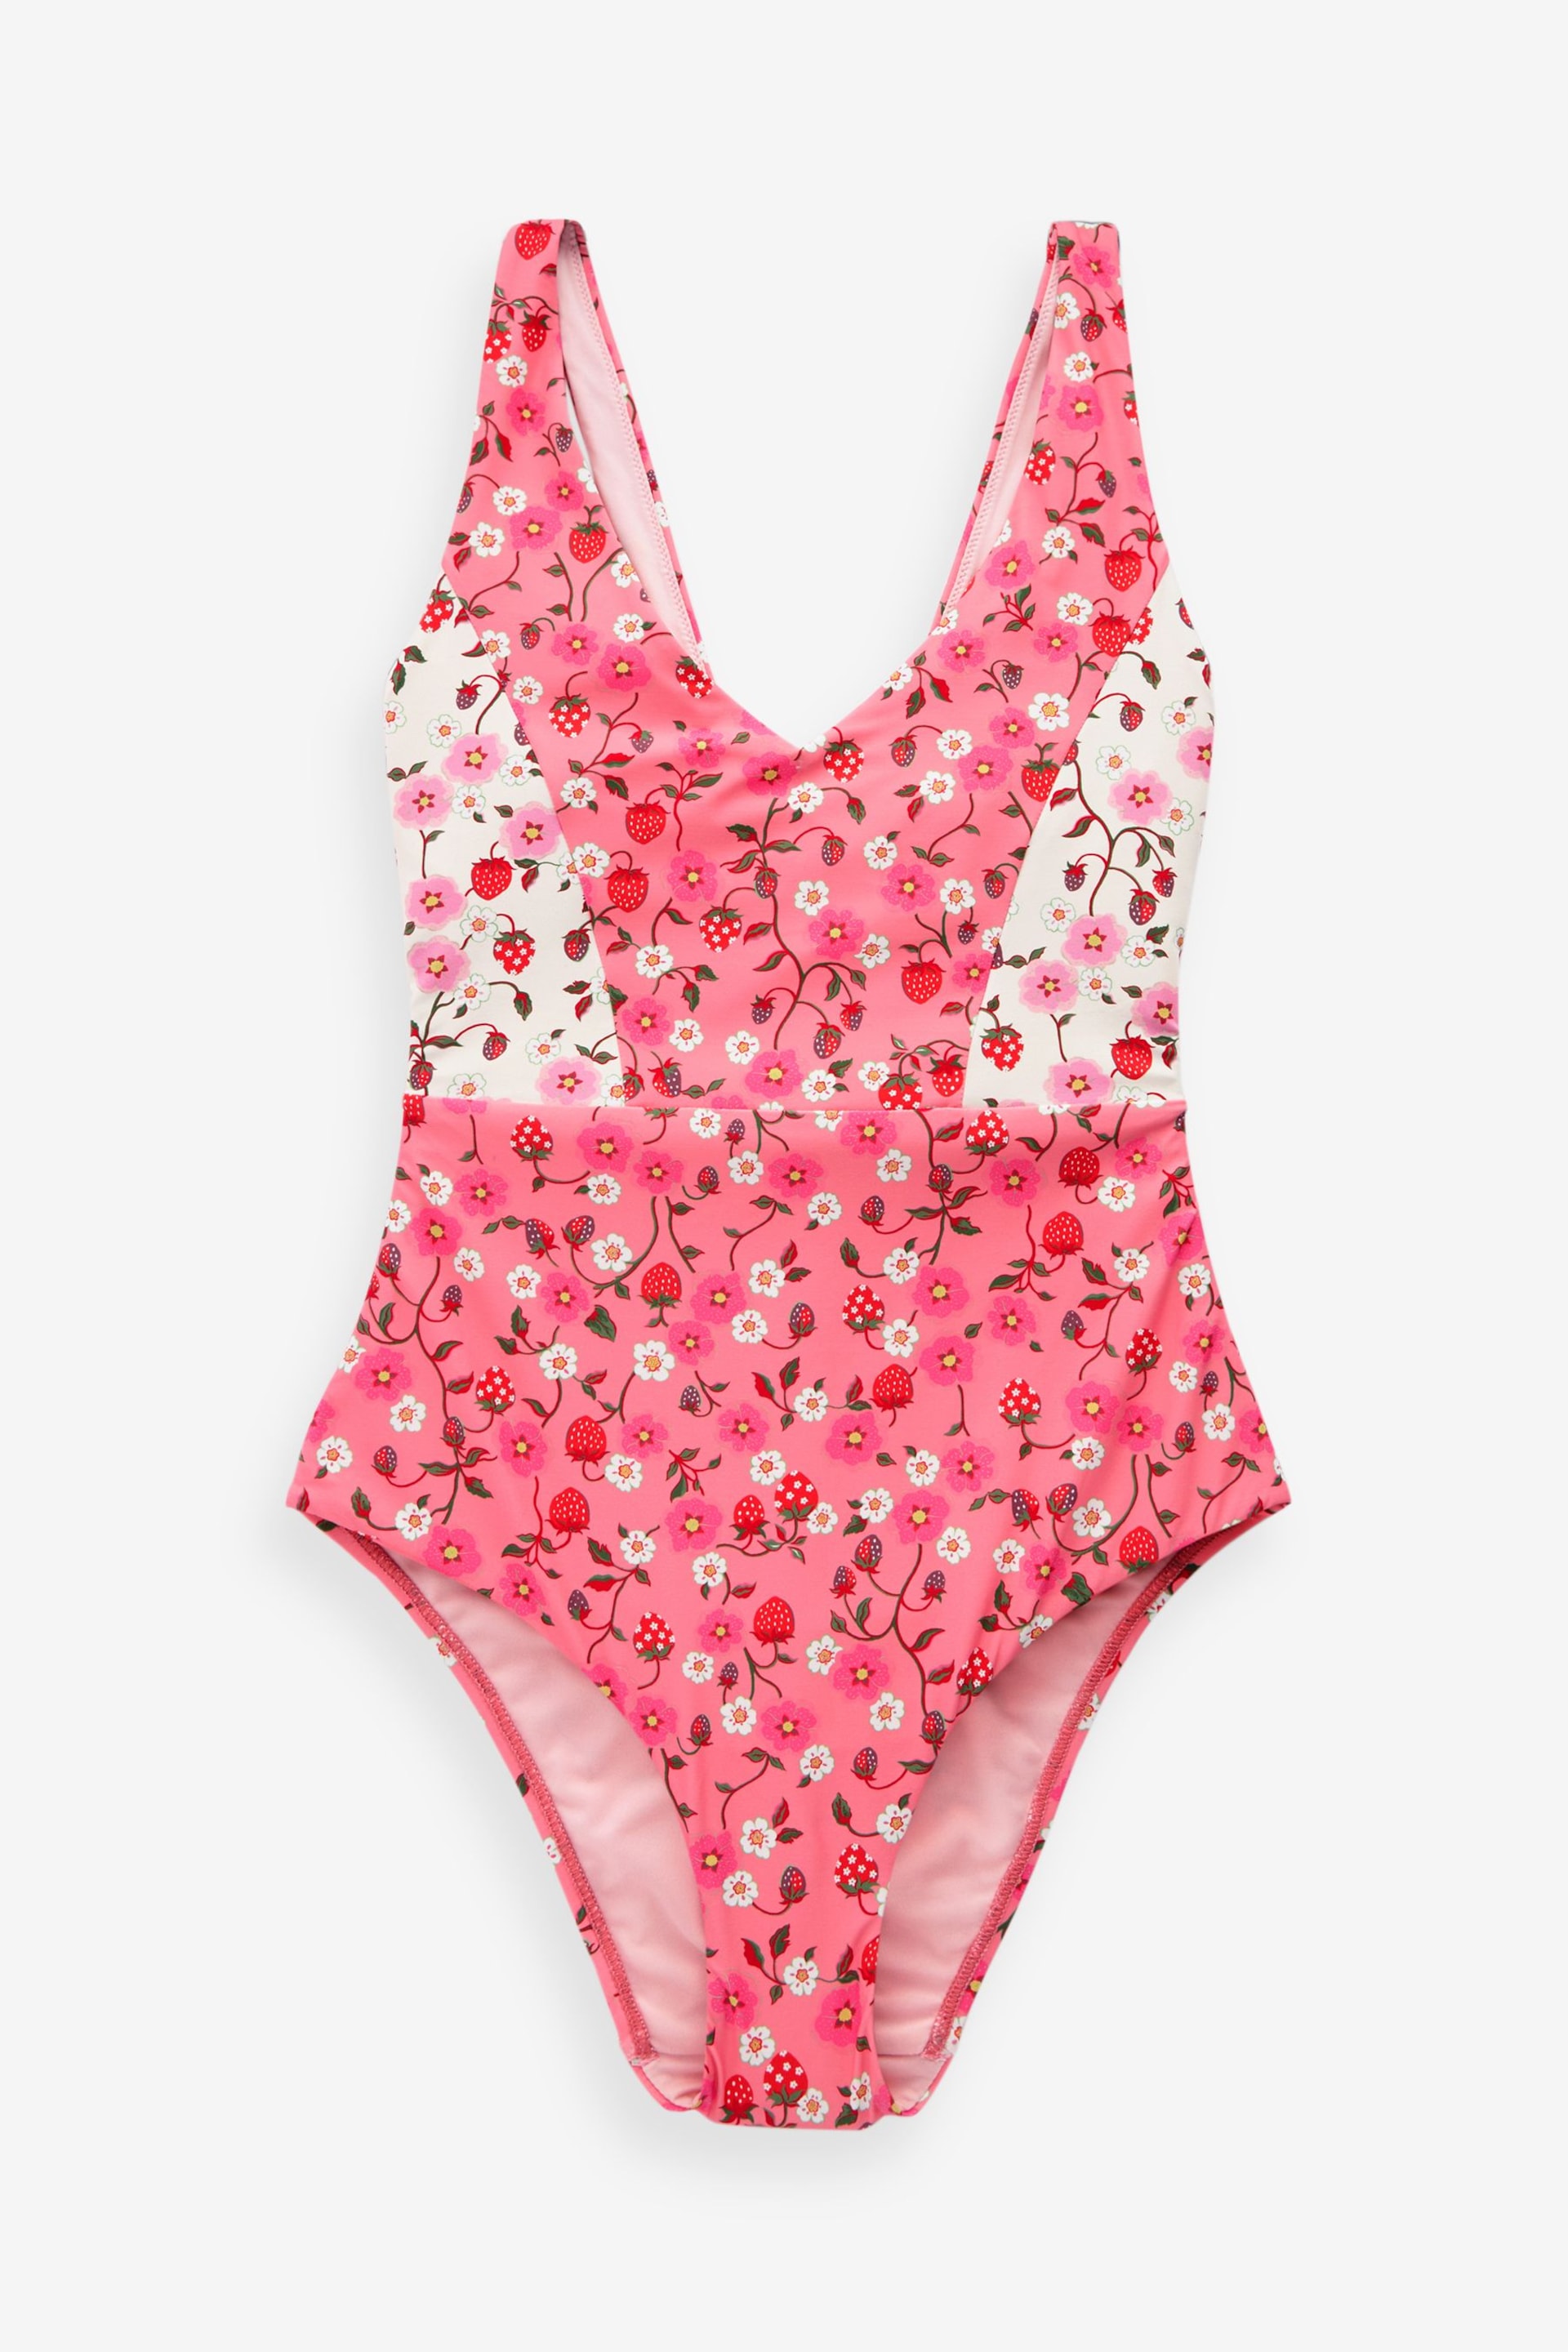 Cath Kidston Pink Ditsy Floral V-Neck Swimsuit - Image 3 of 3